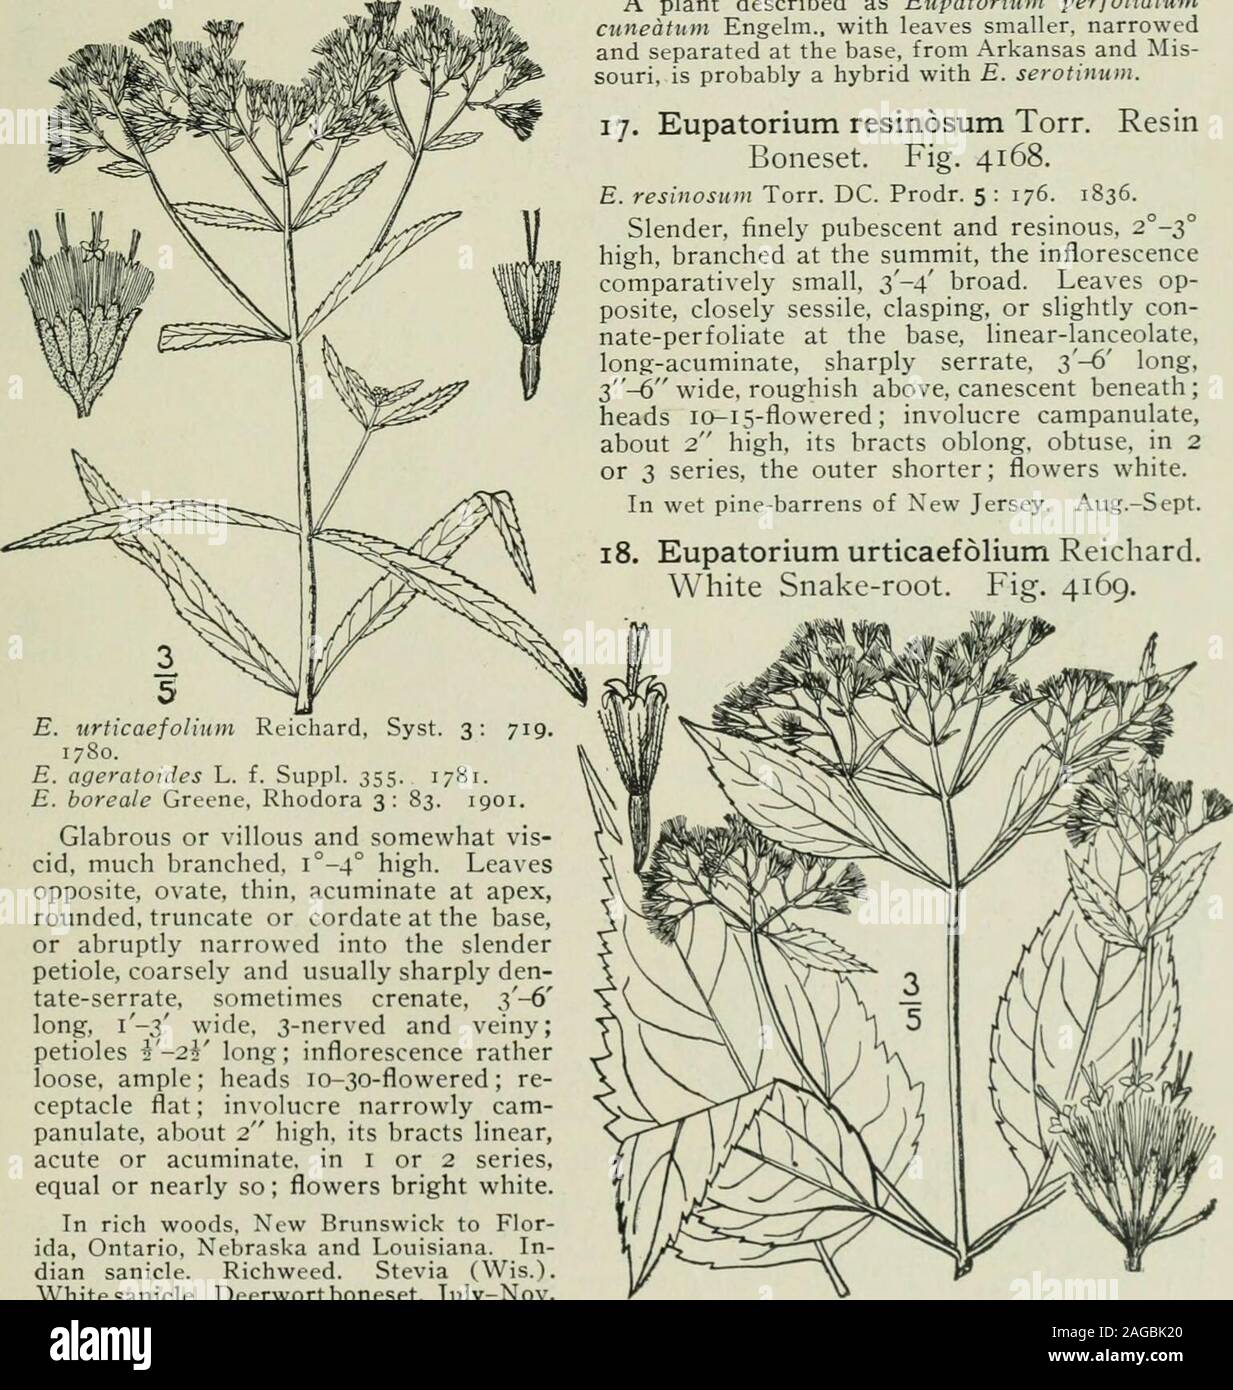 . An illustrated flora of the northern United States, Canada and the British possessions : from Newfoundland to the parallel of the southern boundary of Virginia and from the Atlantic Ocean westward to the 102nd meridian. A plant described as Eupatorium perfoliatumcimeatum Engelm., with leaves smaller, narrowedand separated at the base, from Arkansas and Mis-souri, is probably a hybrid with E. serotinum. 17. Eupatorium resinosum Torn ResinBoneset. Fig. 4168. E. resinosum Torr. DC. Prodr. 5 : 176. 1836. Slender, finely pubescent and resinous, 2°-3°high, branched at the summit, the inflorescence Stock Photo